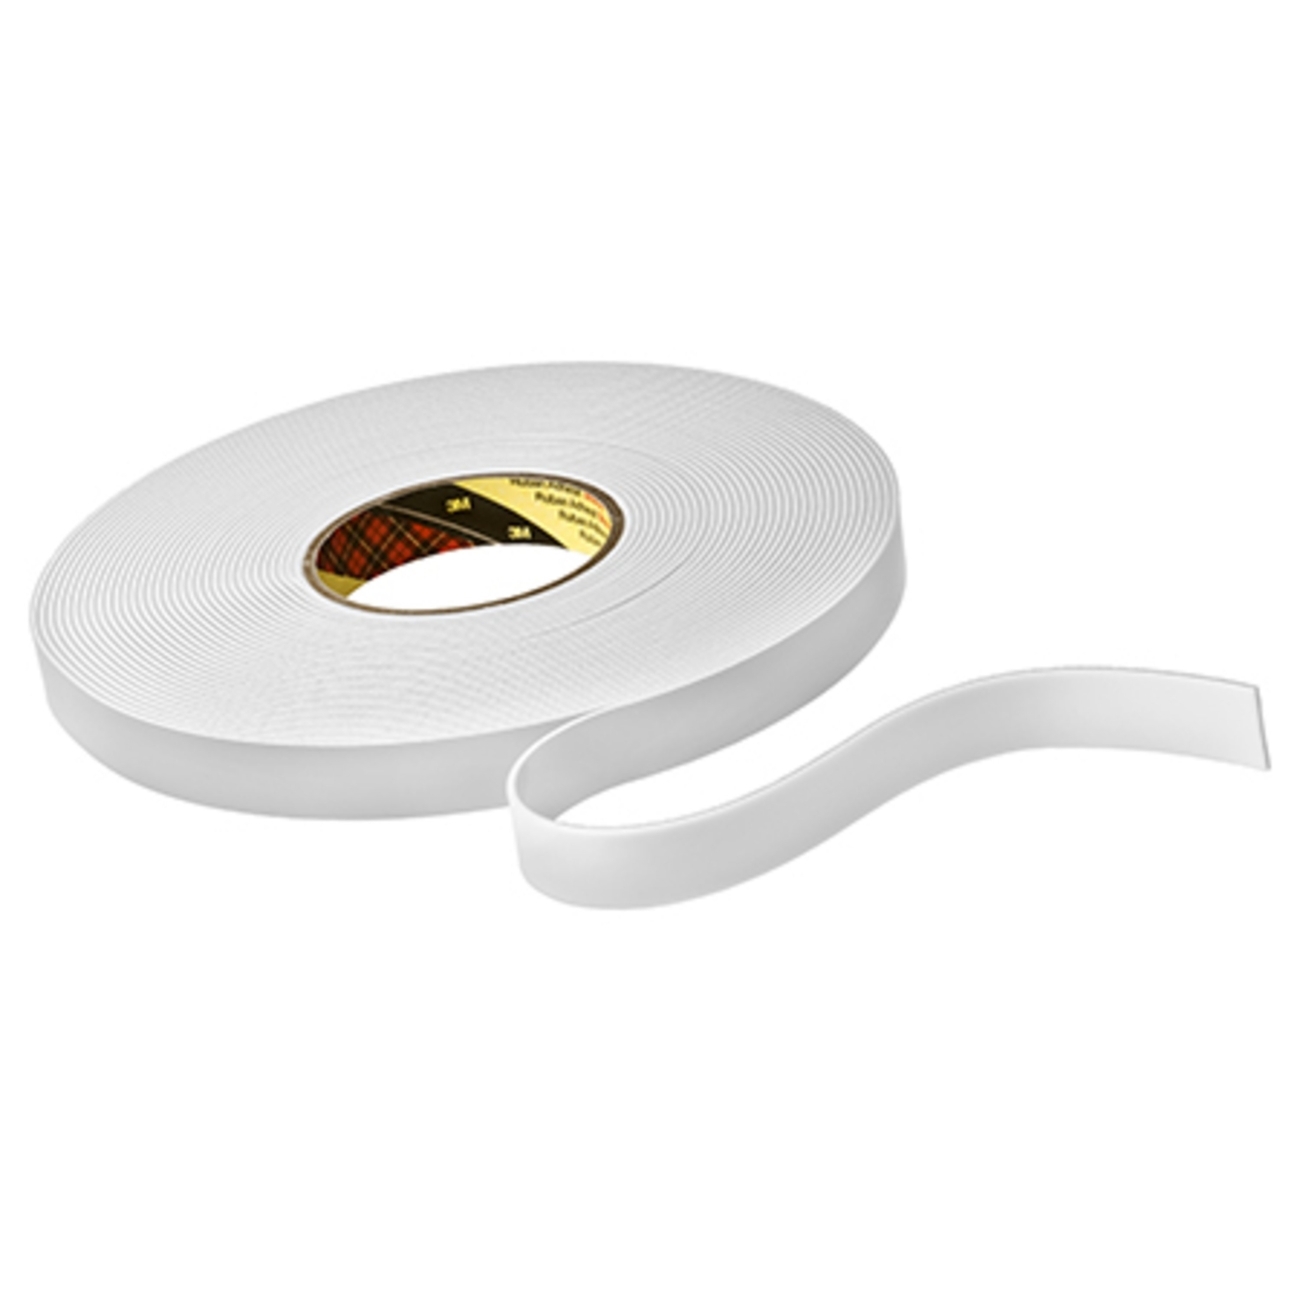 3M Double-sided PE foam tape with acrylic adhesive 9515W, white, 9 mm x 33 m, 1.5 mm